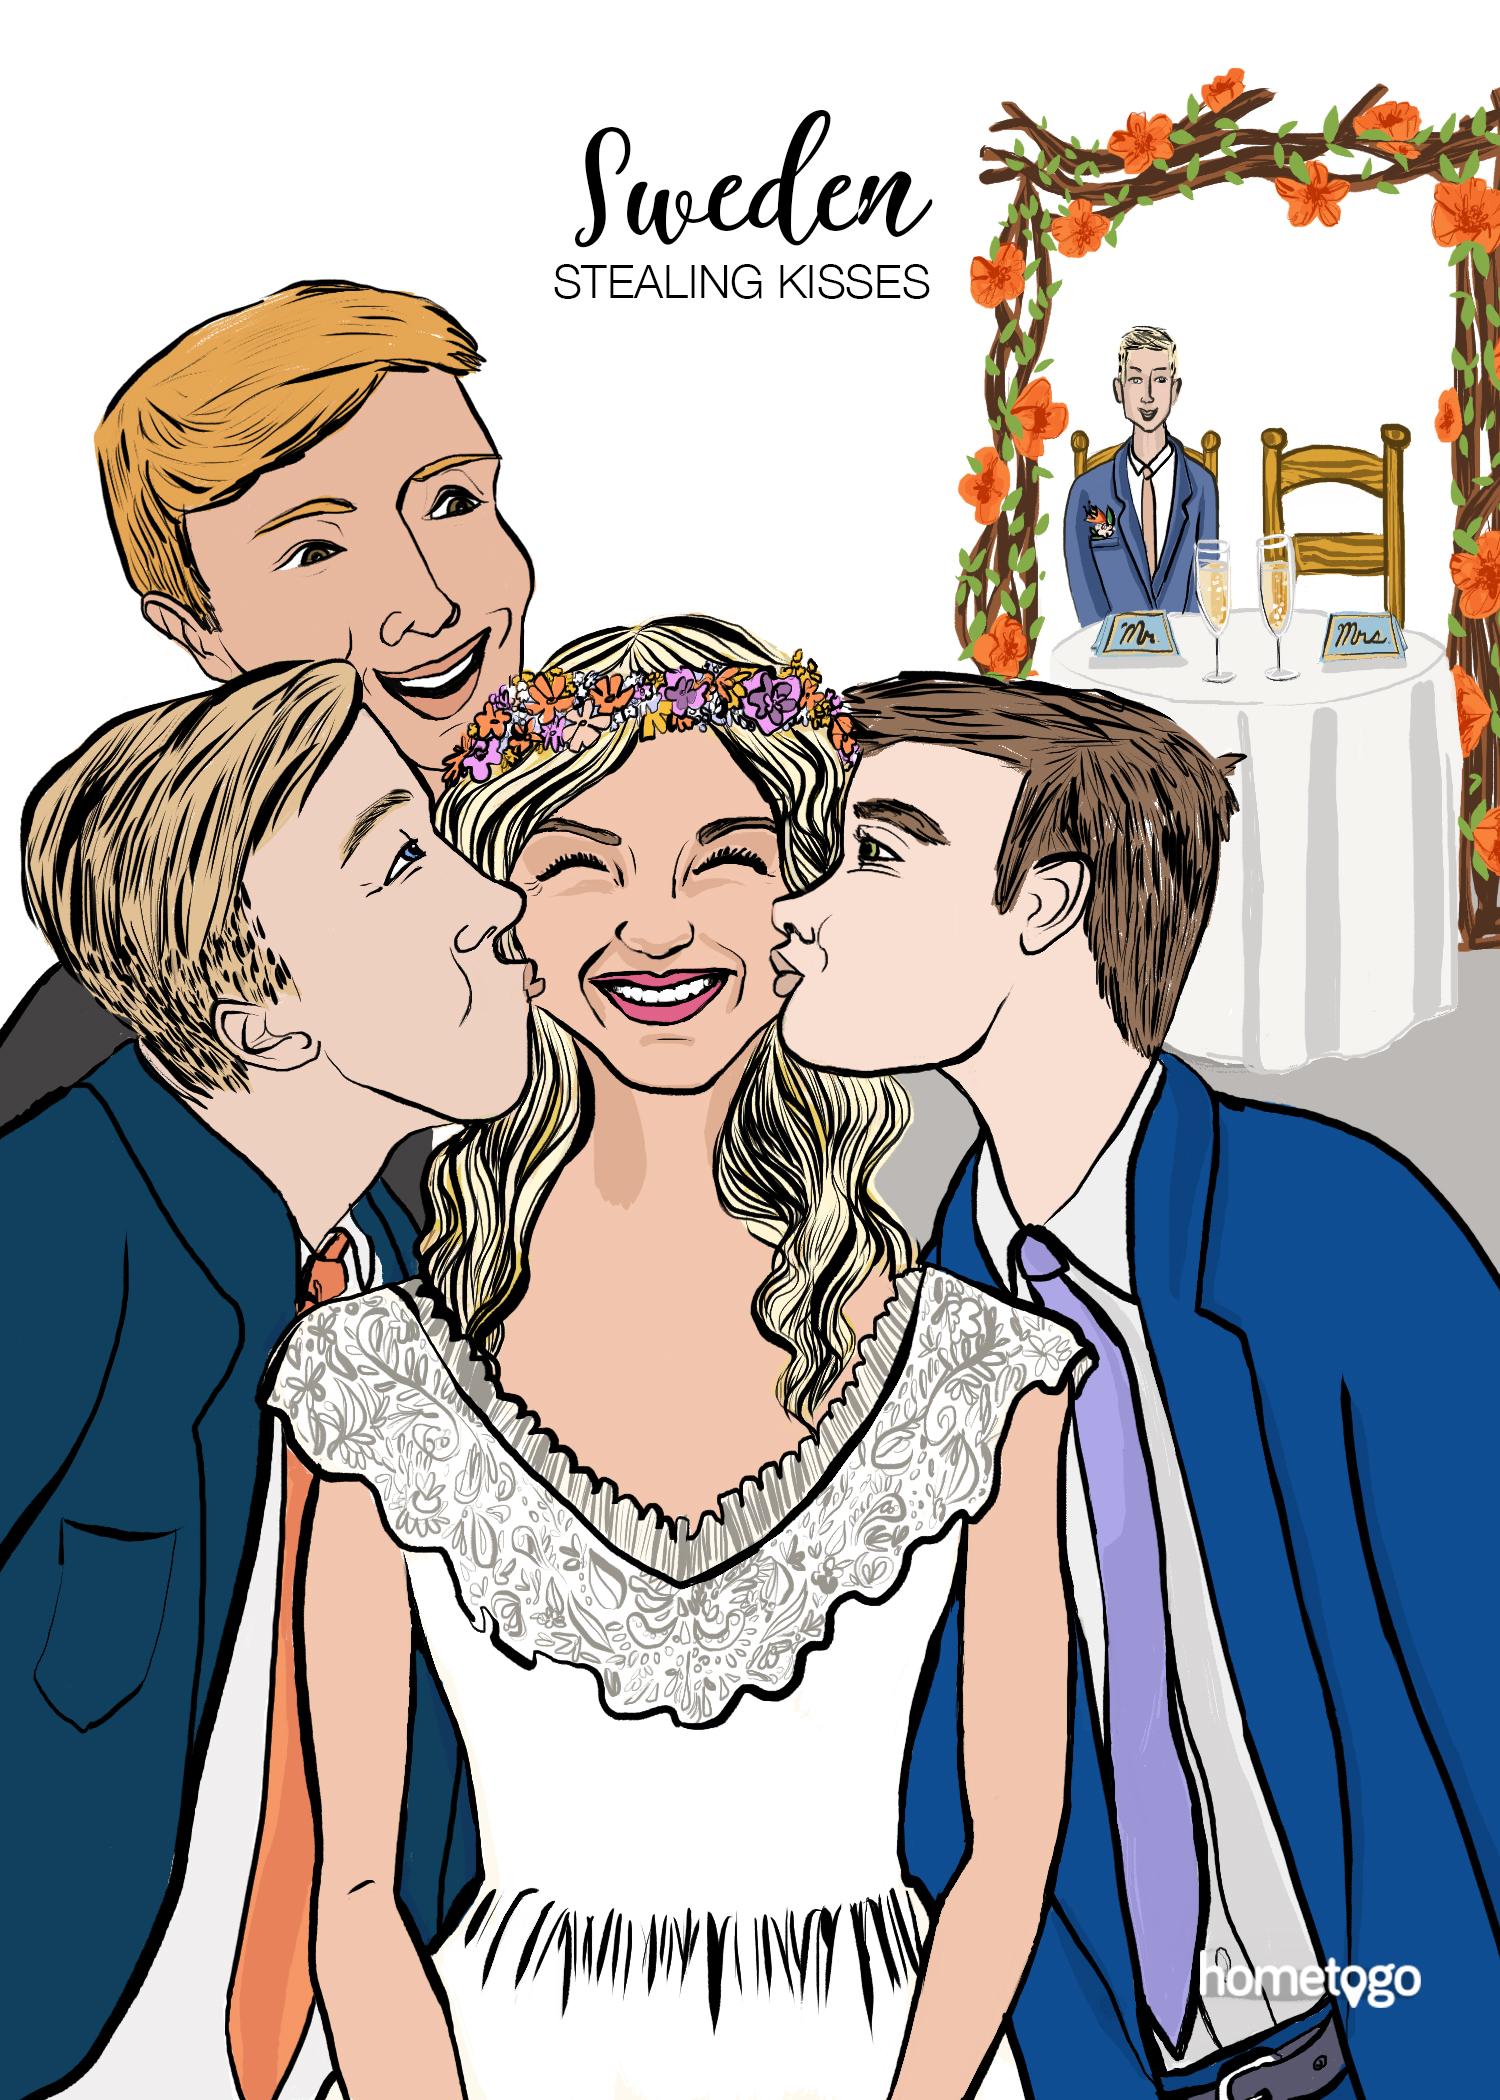 Illustration featuring the wedding custom from Sweden, where attendees steal kisses to the newlyweds